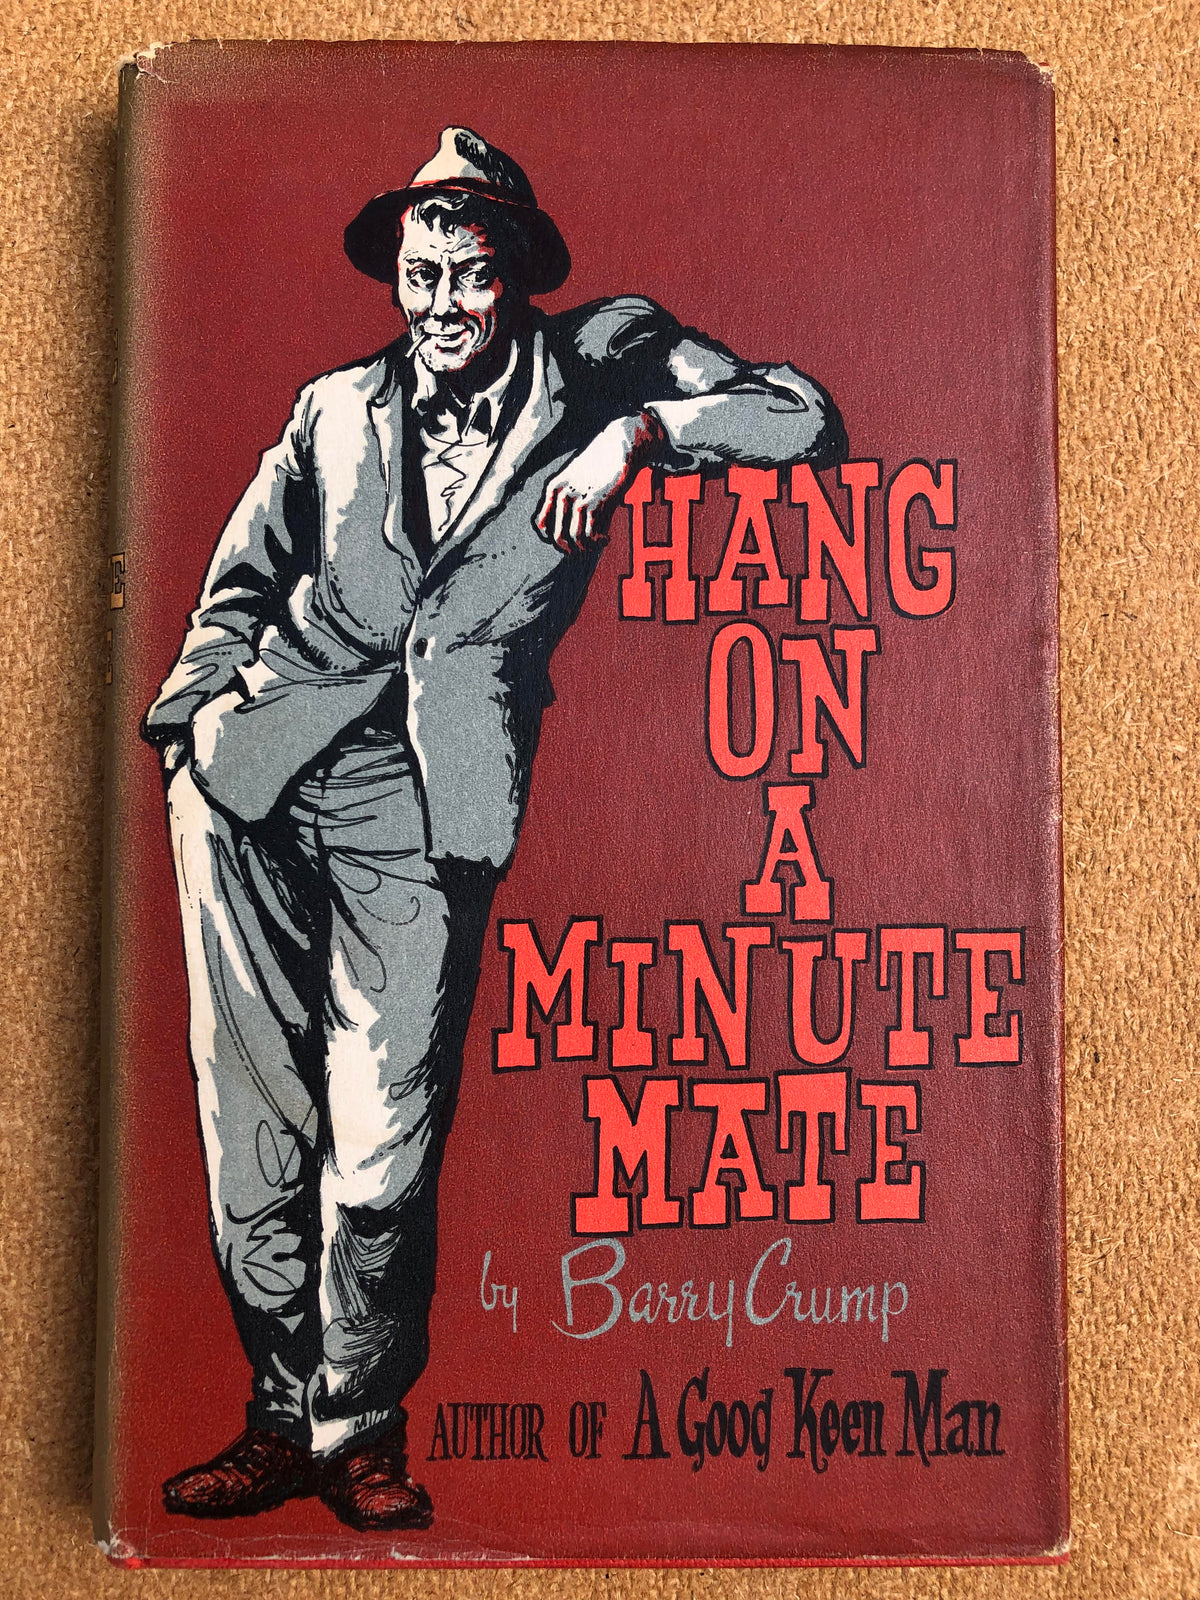 Hang on a Minute Mate - Barry Crump